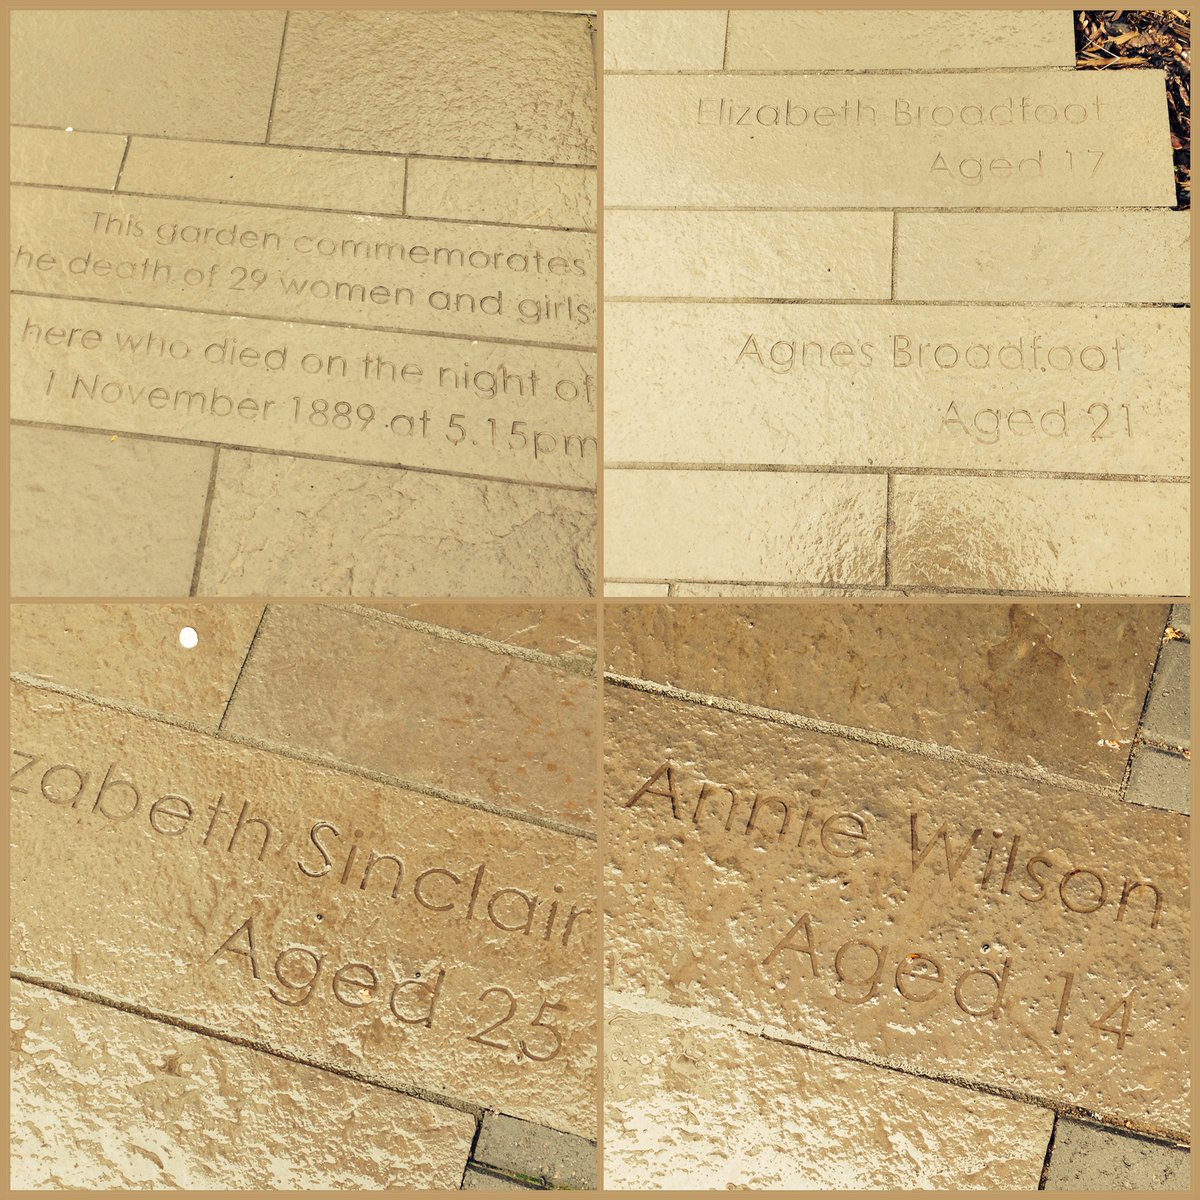 At the end of Bain Street, turn left up London Road, passing Thenue Housing Association, which we now know is named for St Enoch! At Calton Heritage and Learning Centre there is a pavement memorial to the women who died in the Templeton disaster mentioned a few stops ago. 20/25